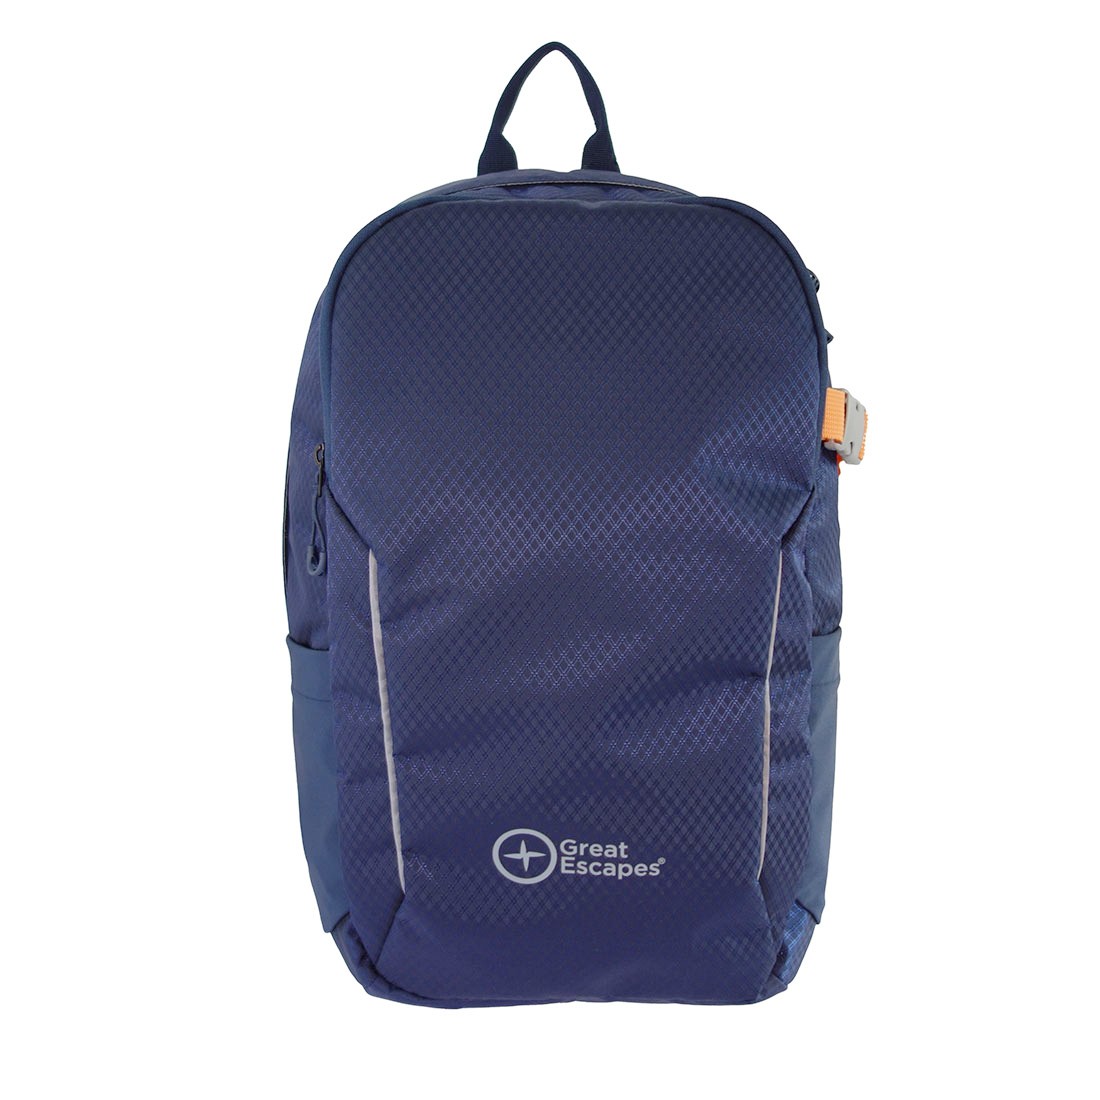 ROMA 18 - Backpack for leisure 18 liters